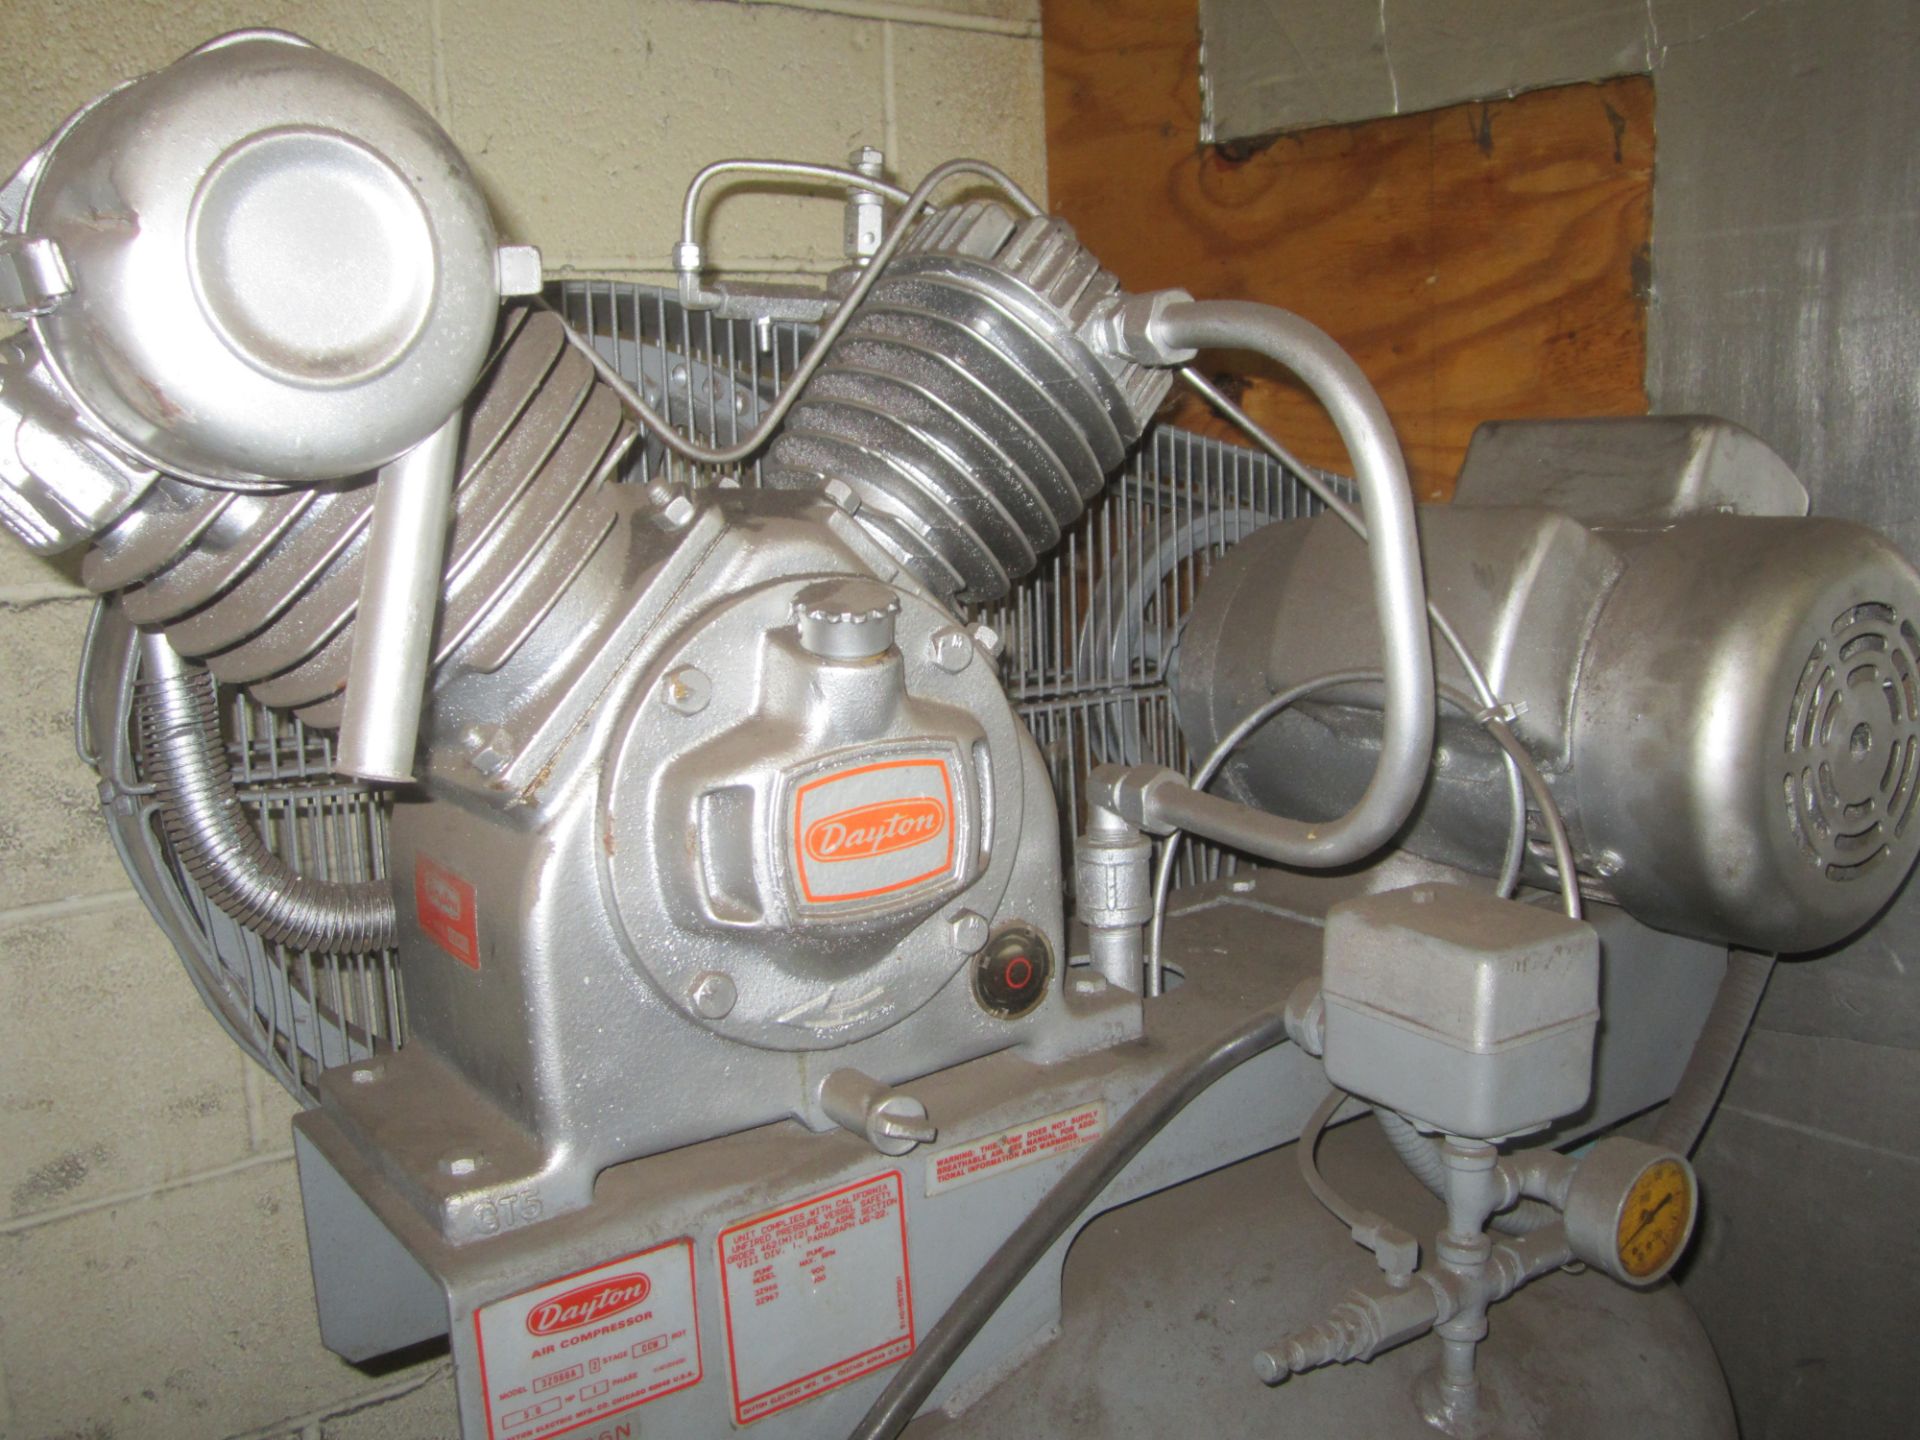 Dayton 2-Stage Air Compressor, Tank Mounted, 5 HP, 230/1/60, Vertical Mount, Loading Fee $75.00 - Image 2 of 2